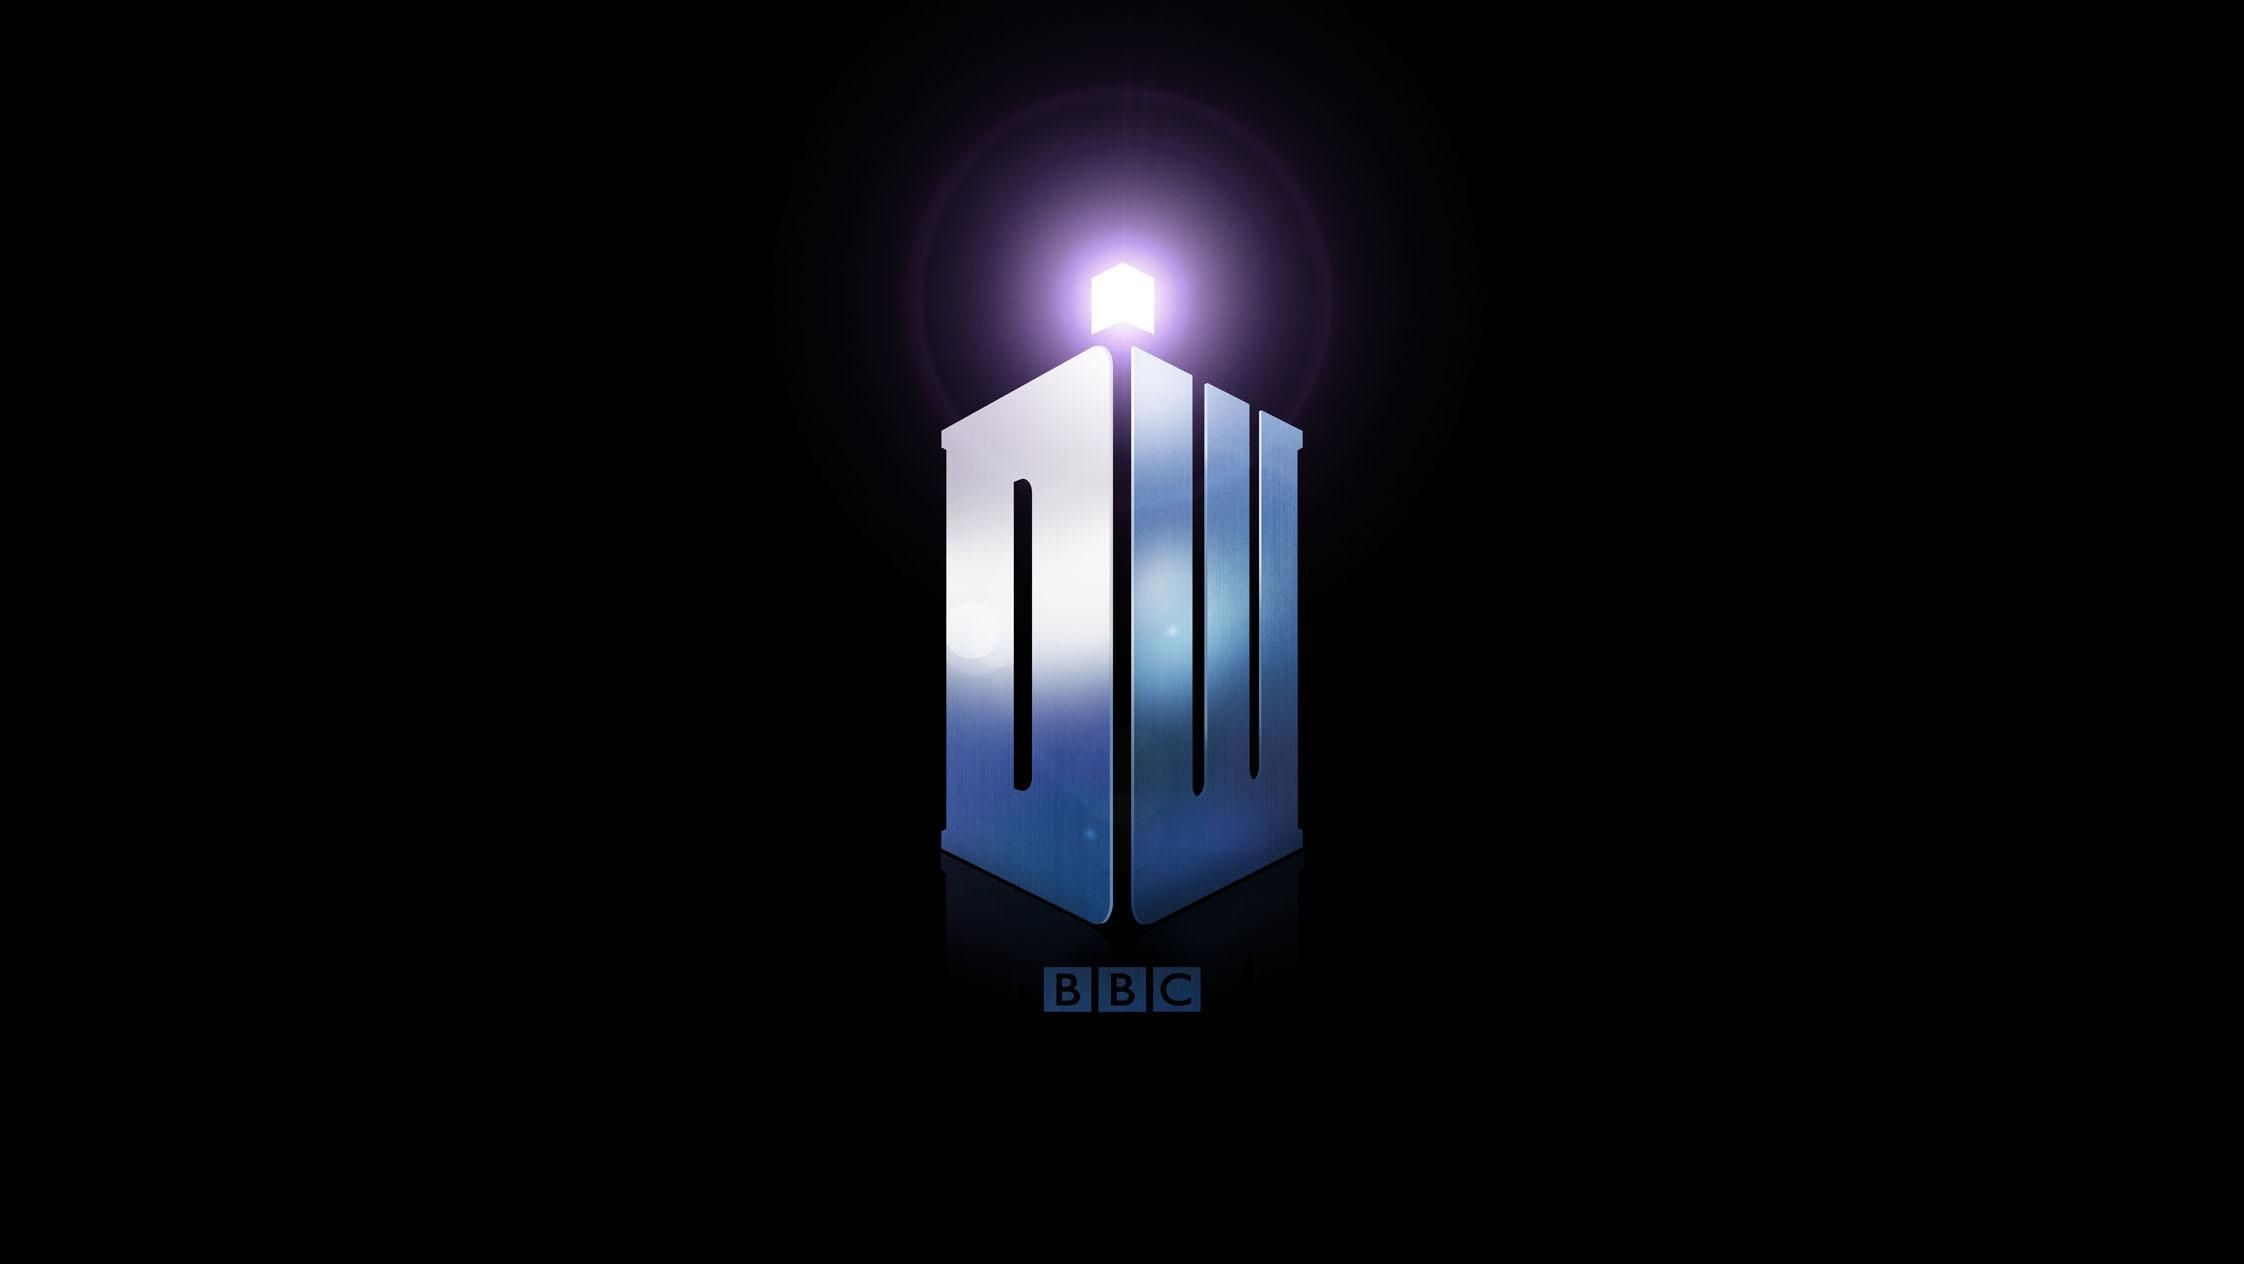 2244x1264 Doctor who iphone wallpapers tardis